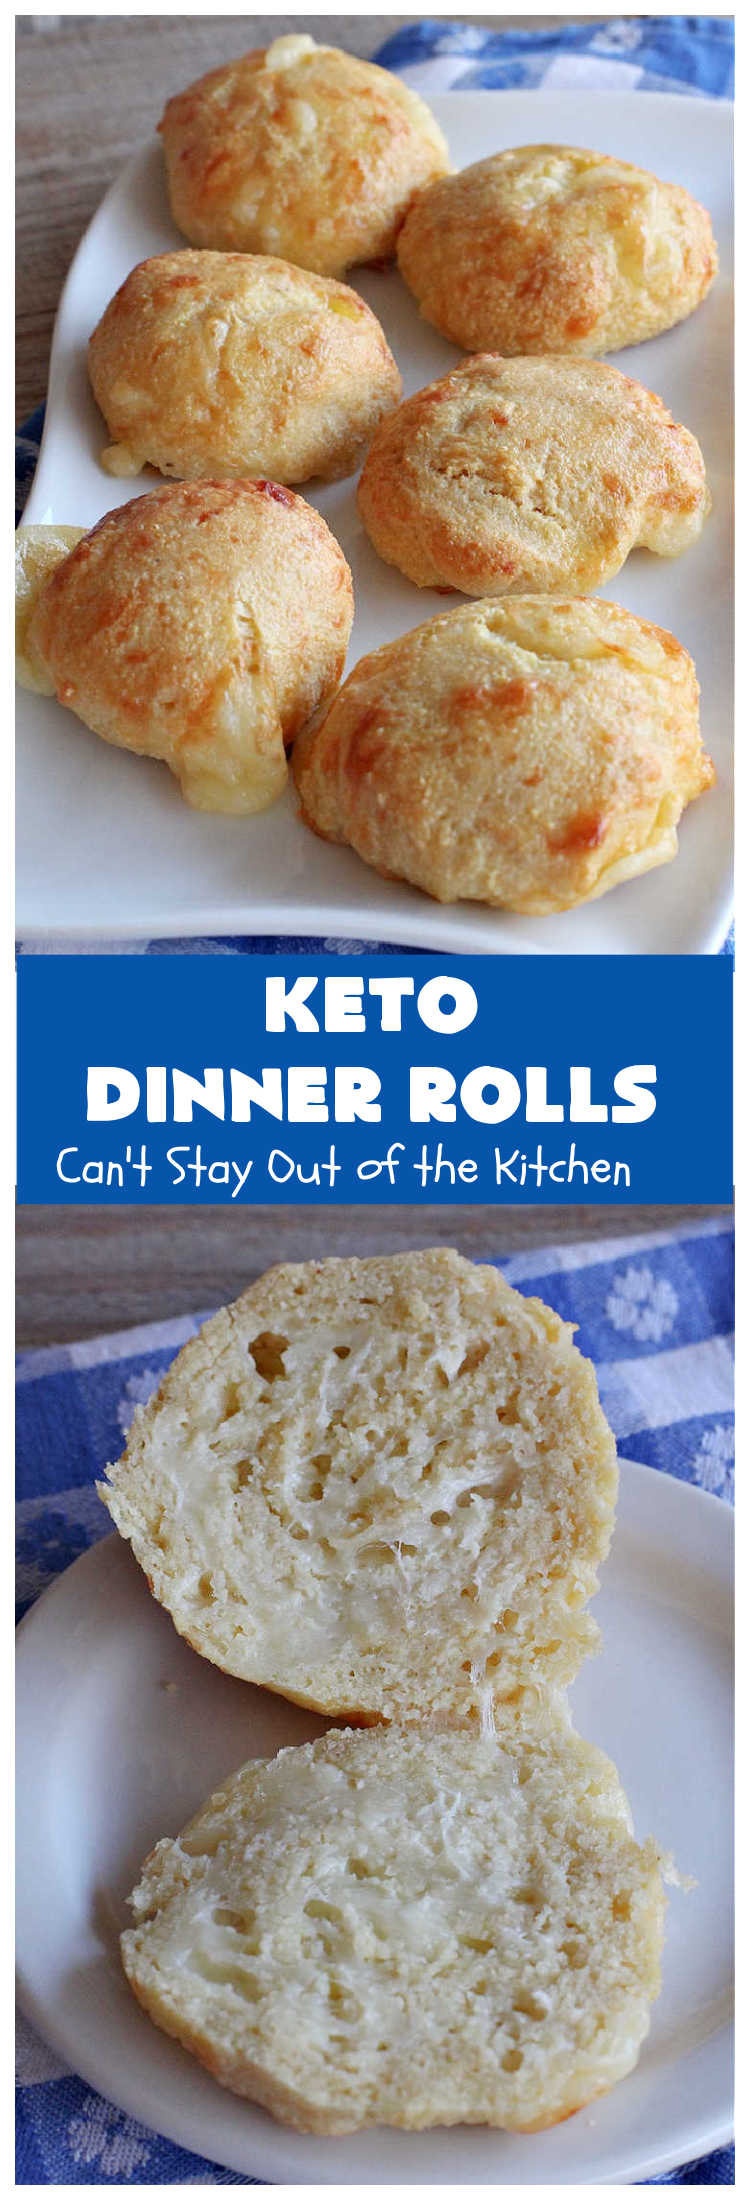 Keto Dinner Rolls | Can't Stay Out of the Kitchen | this easy 4-ingredient #recipe is a great way to make #Keto friendly #DinnerRolls! It includes #CreamCheese #MozzarellaCheese & #AlmondFlour. If you're #diabetic or trying to stay on special diets, this is a great recipe for you. Also great for company or #holiday dinners. #GlutenFree #KetoDinnerRolls